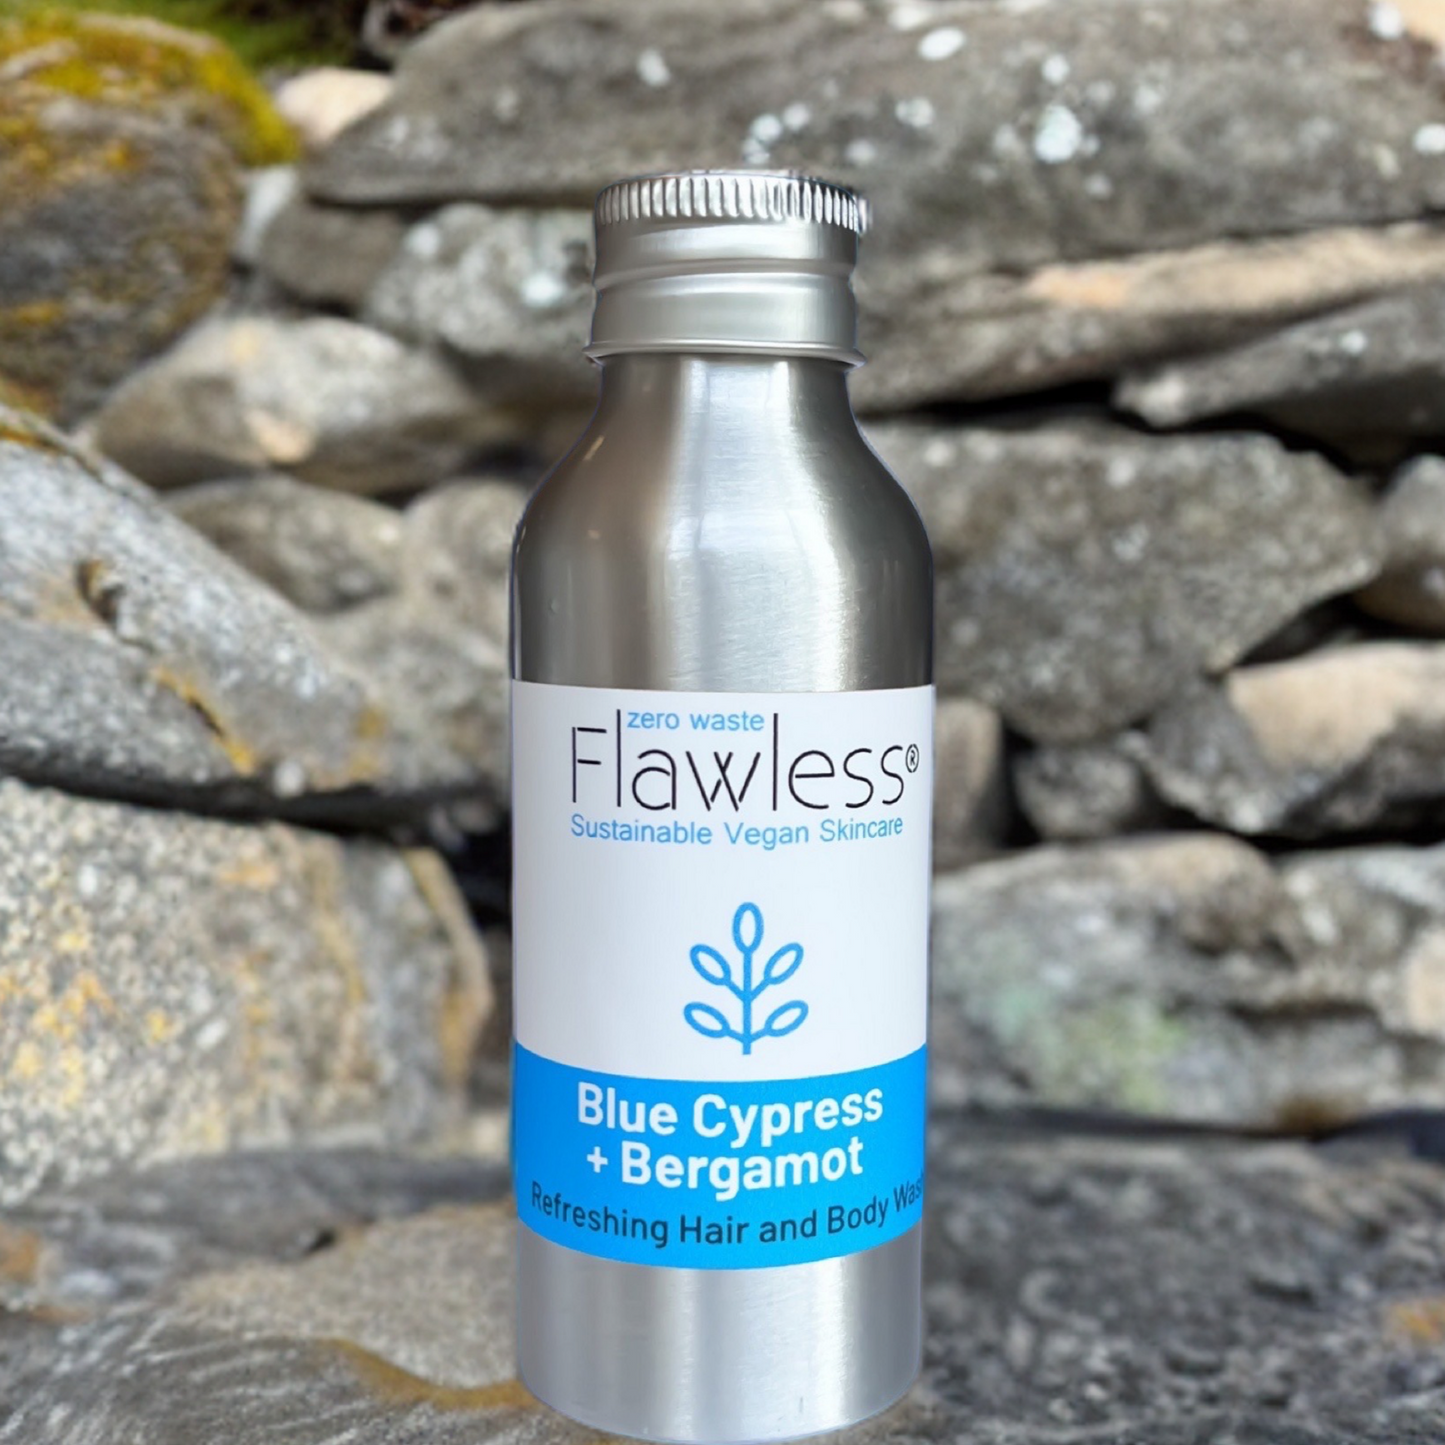 Men’s Hair and Body Wash - Blue Cypress and Bergamot